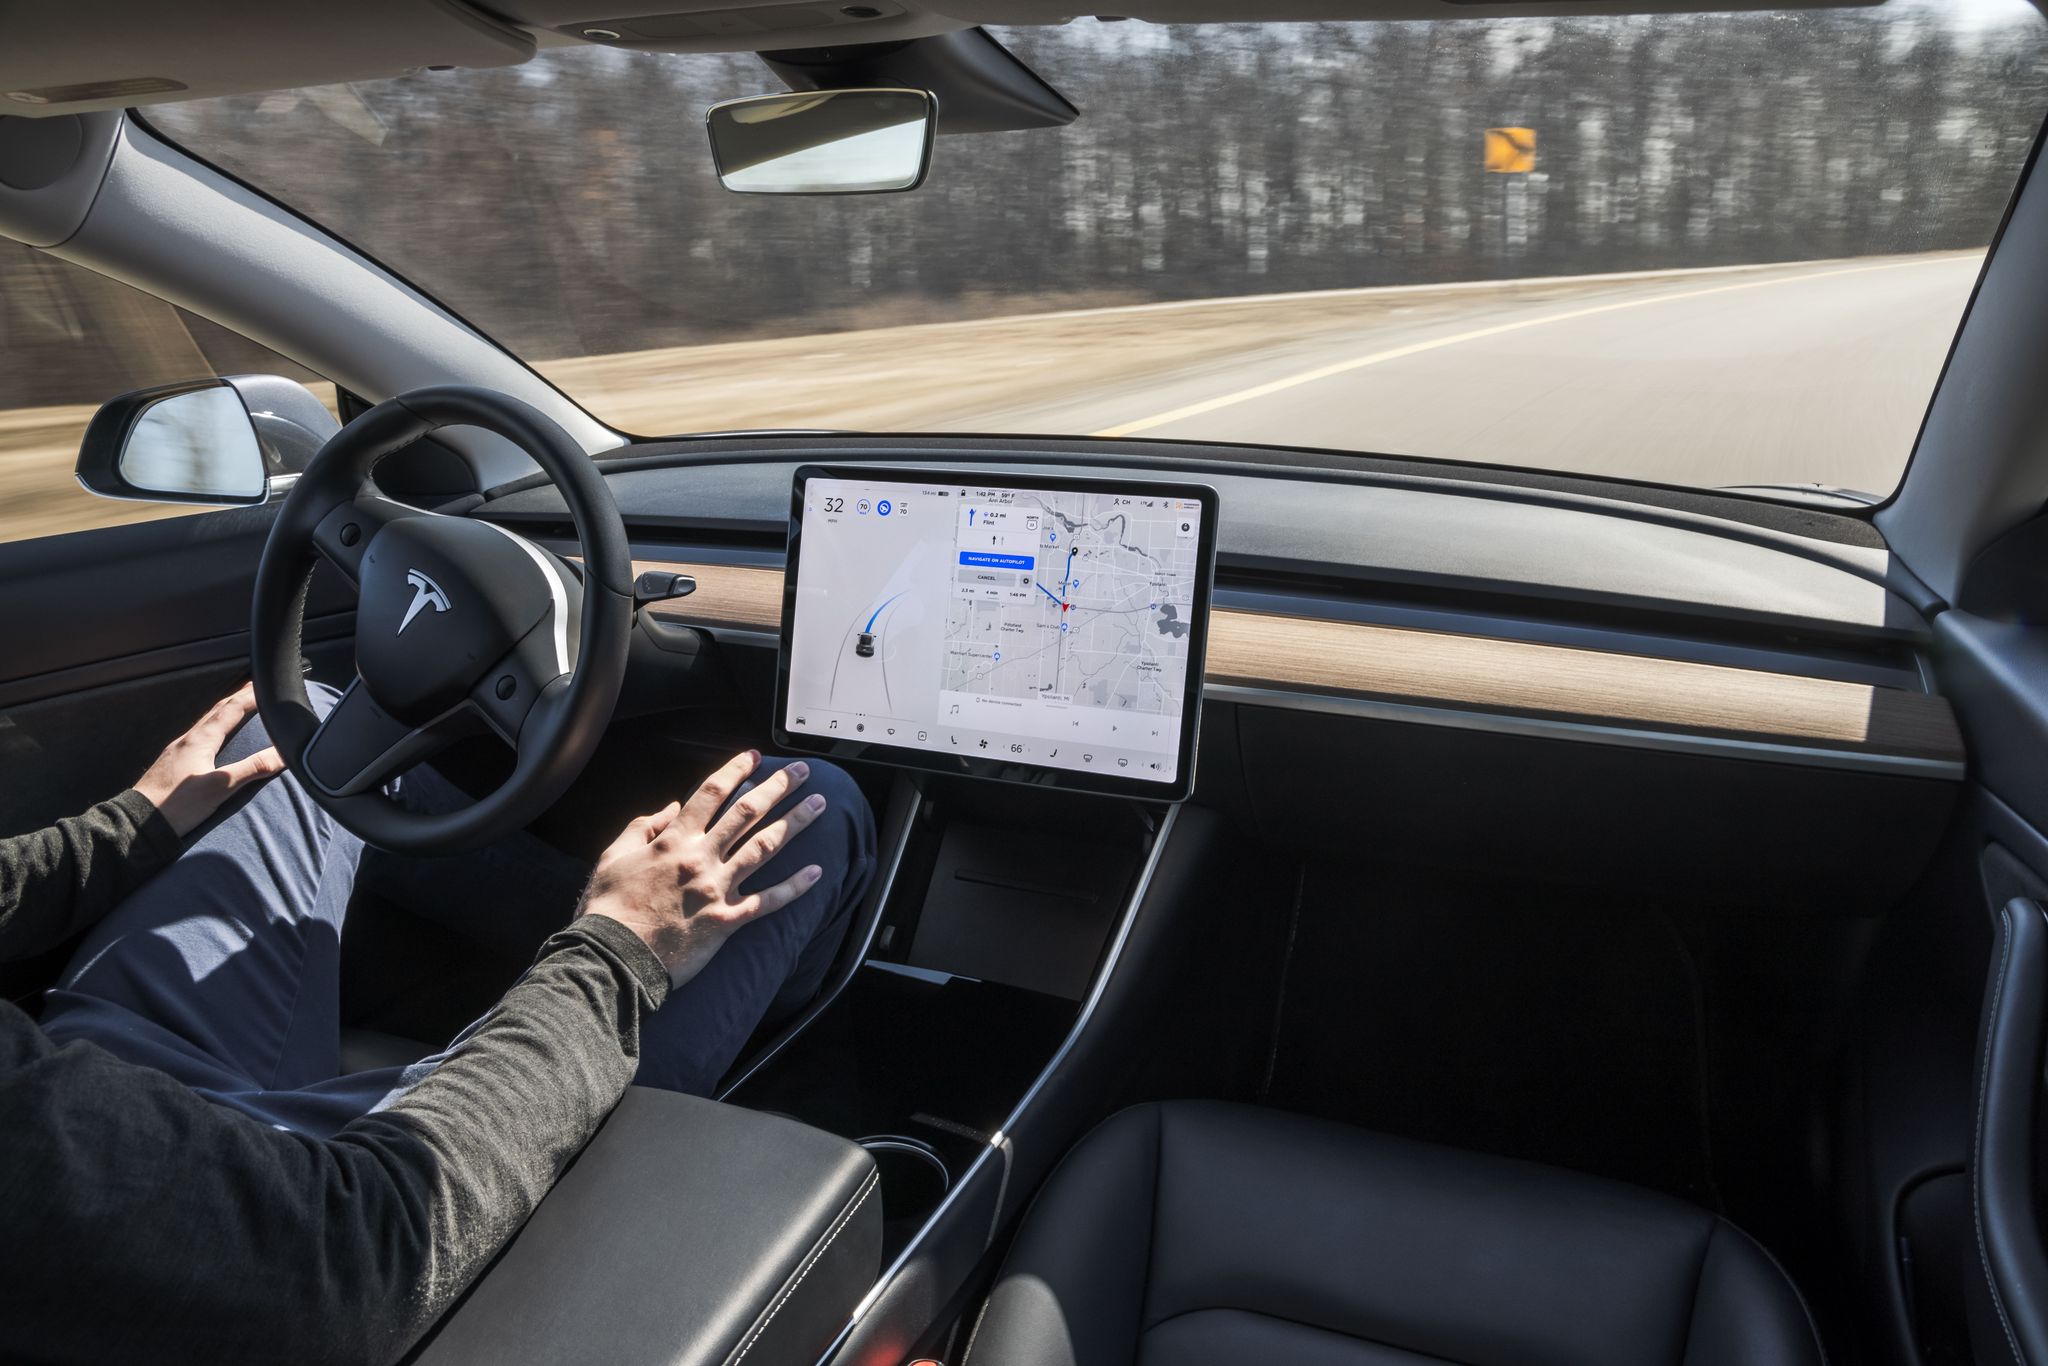 A view of the driving cockpit of a Tesla car, proven to be capable of full autonomy as of 2020